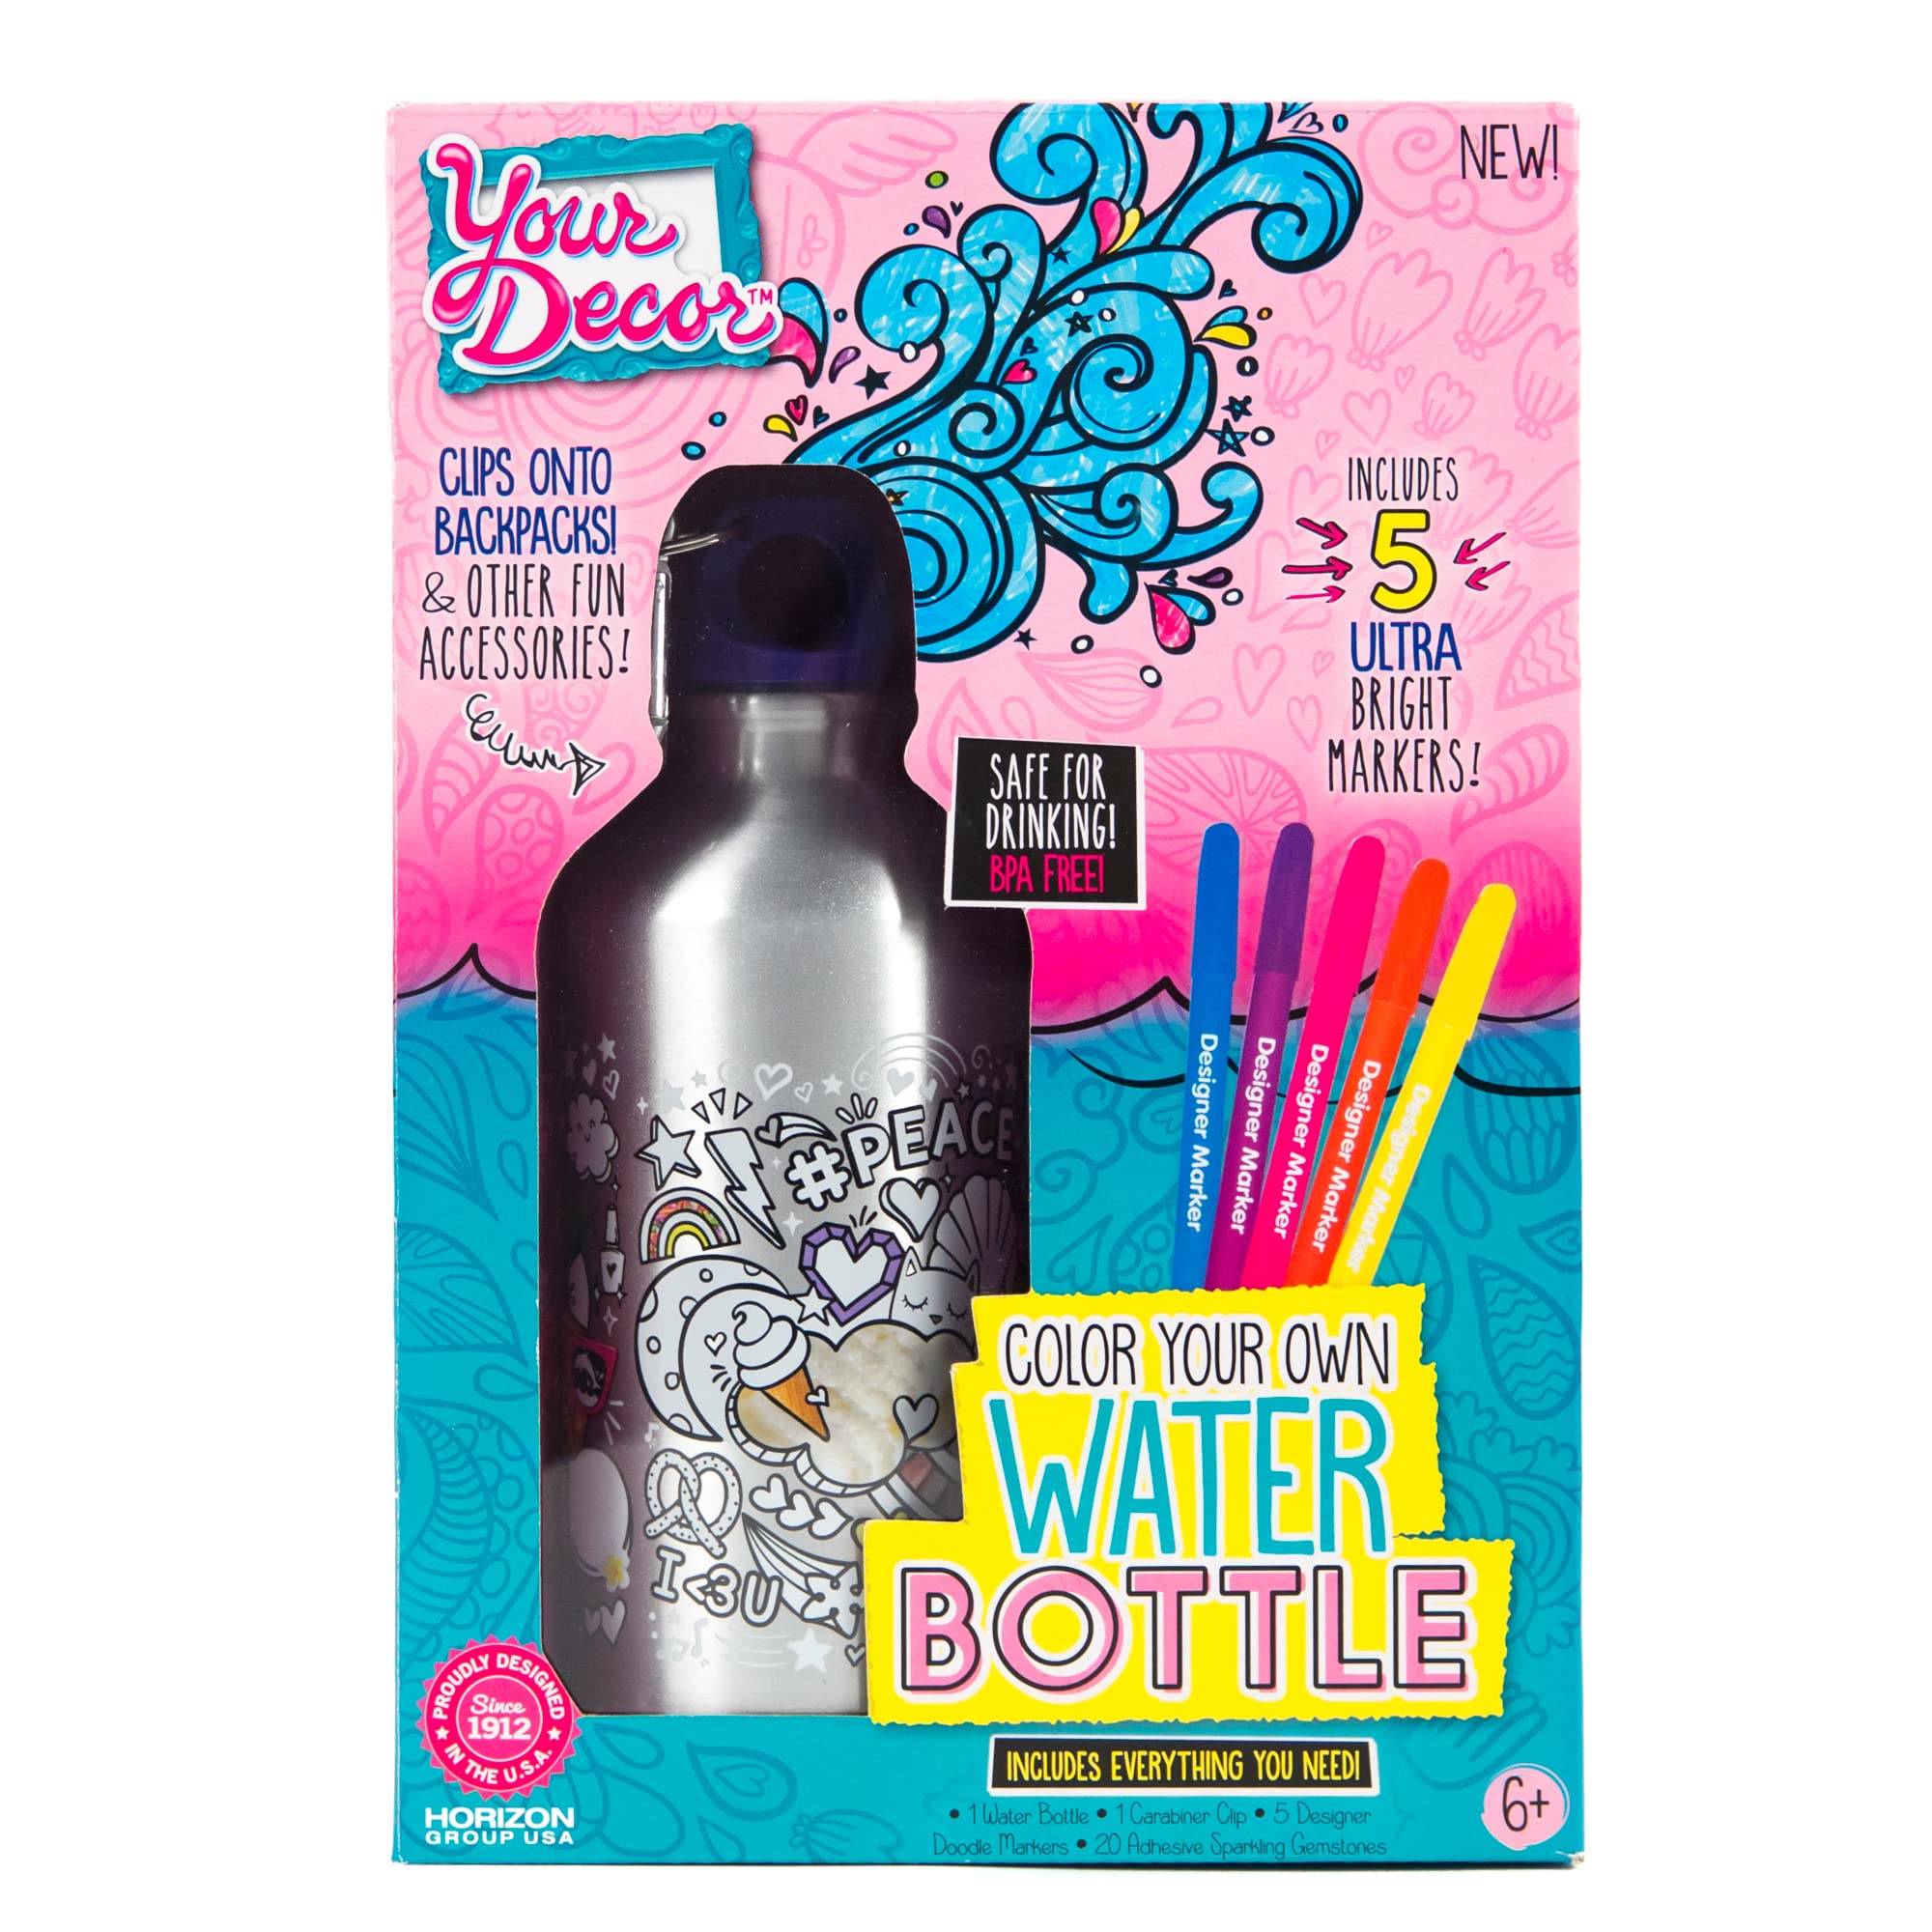 Just My Style Color Your Own Water Bottle w/ Gemstones Kids' Craft Kit $7.44 + Free Shipping w/ Prime or on $35+